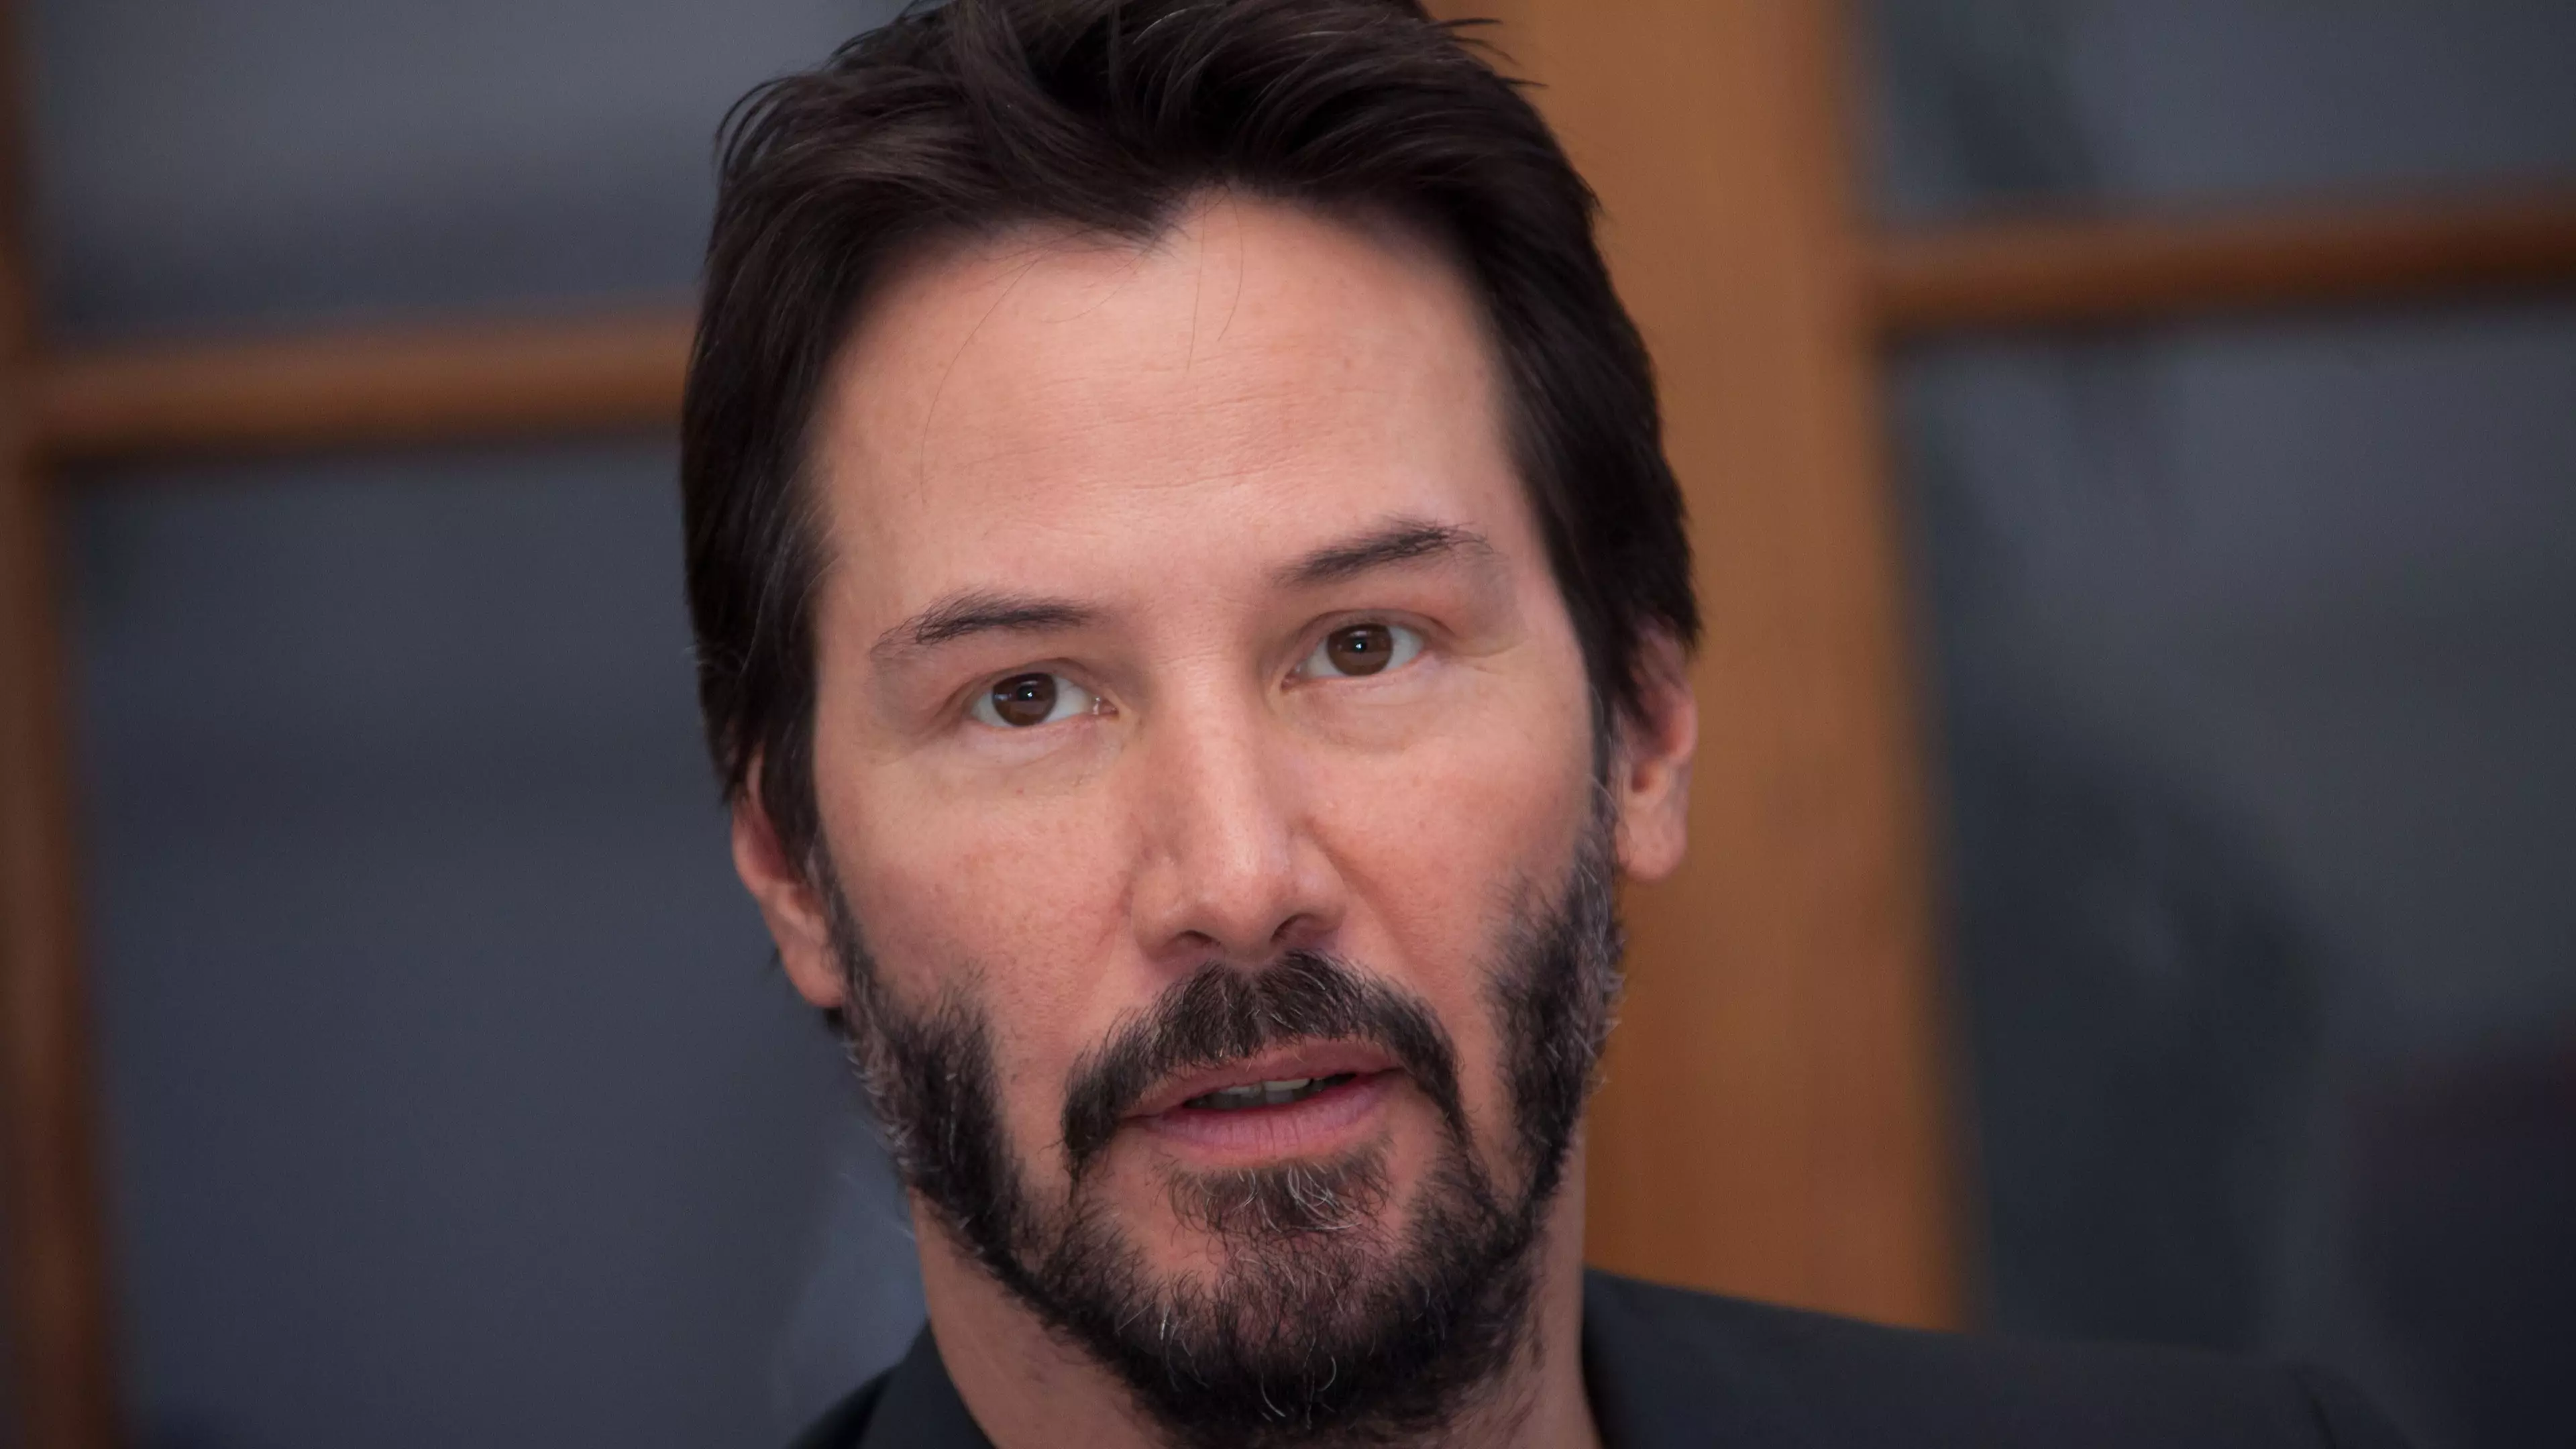 Keanu Reeves Poses For Photo At Couple's Wedding